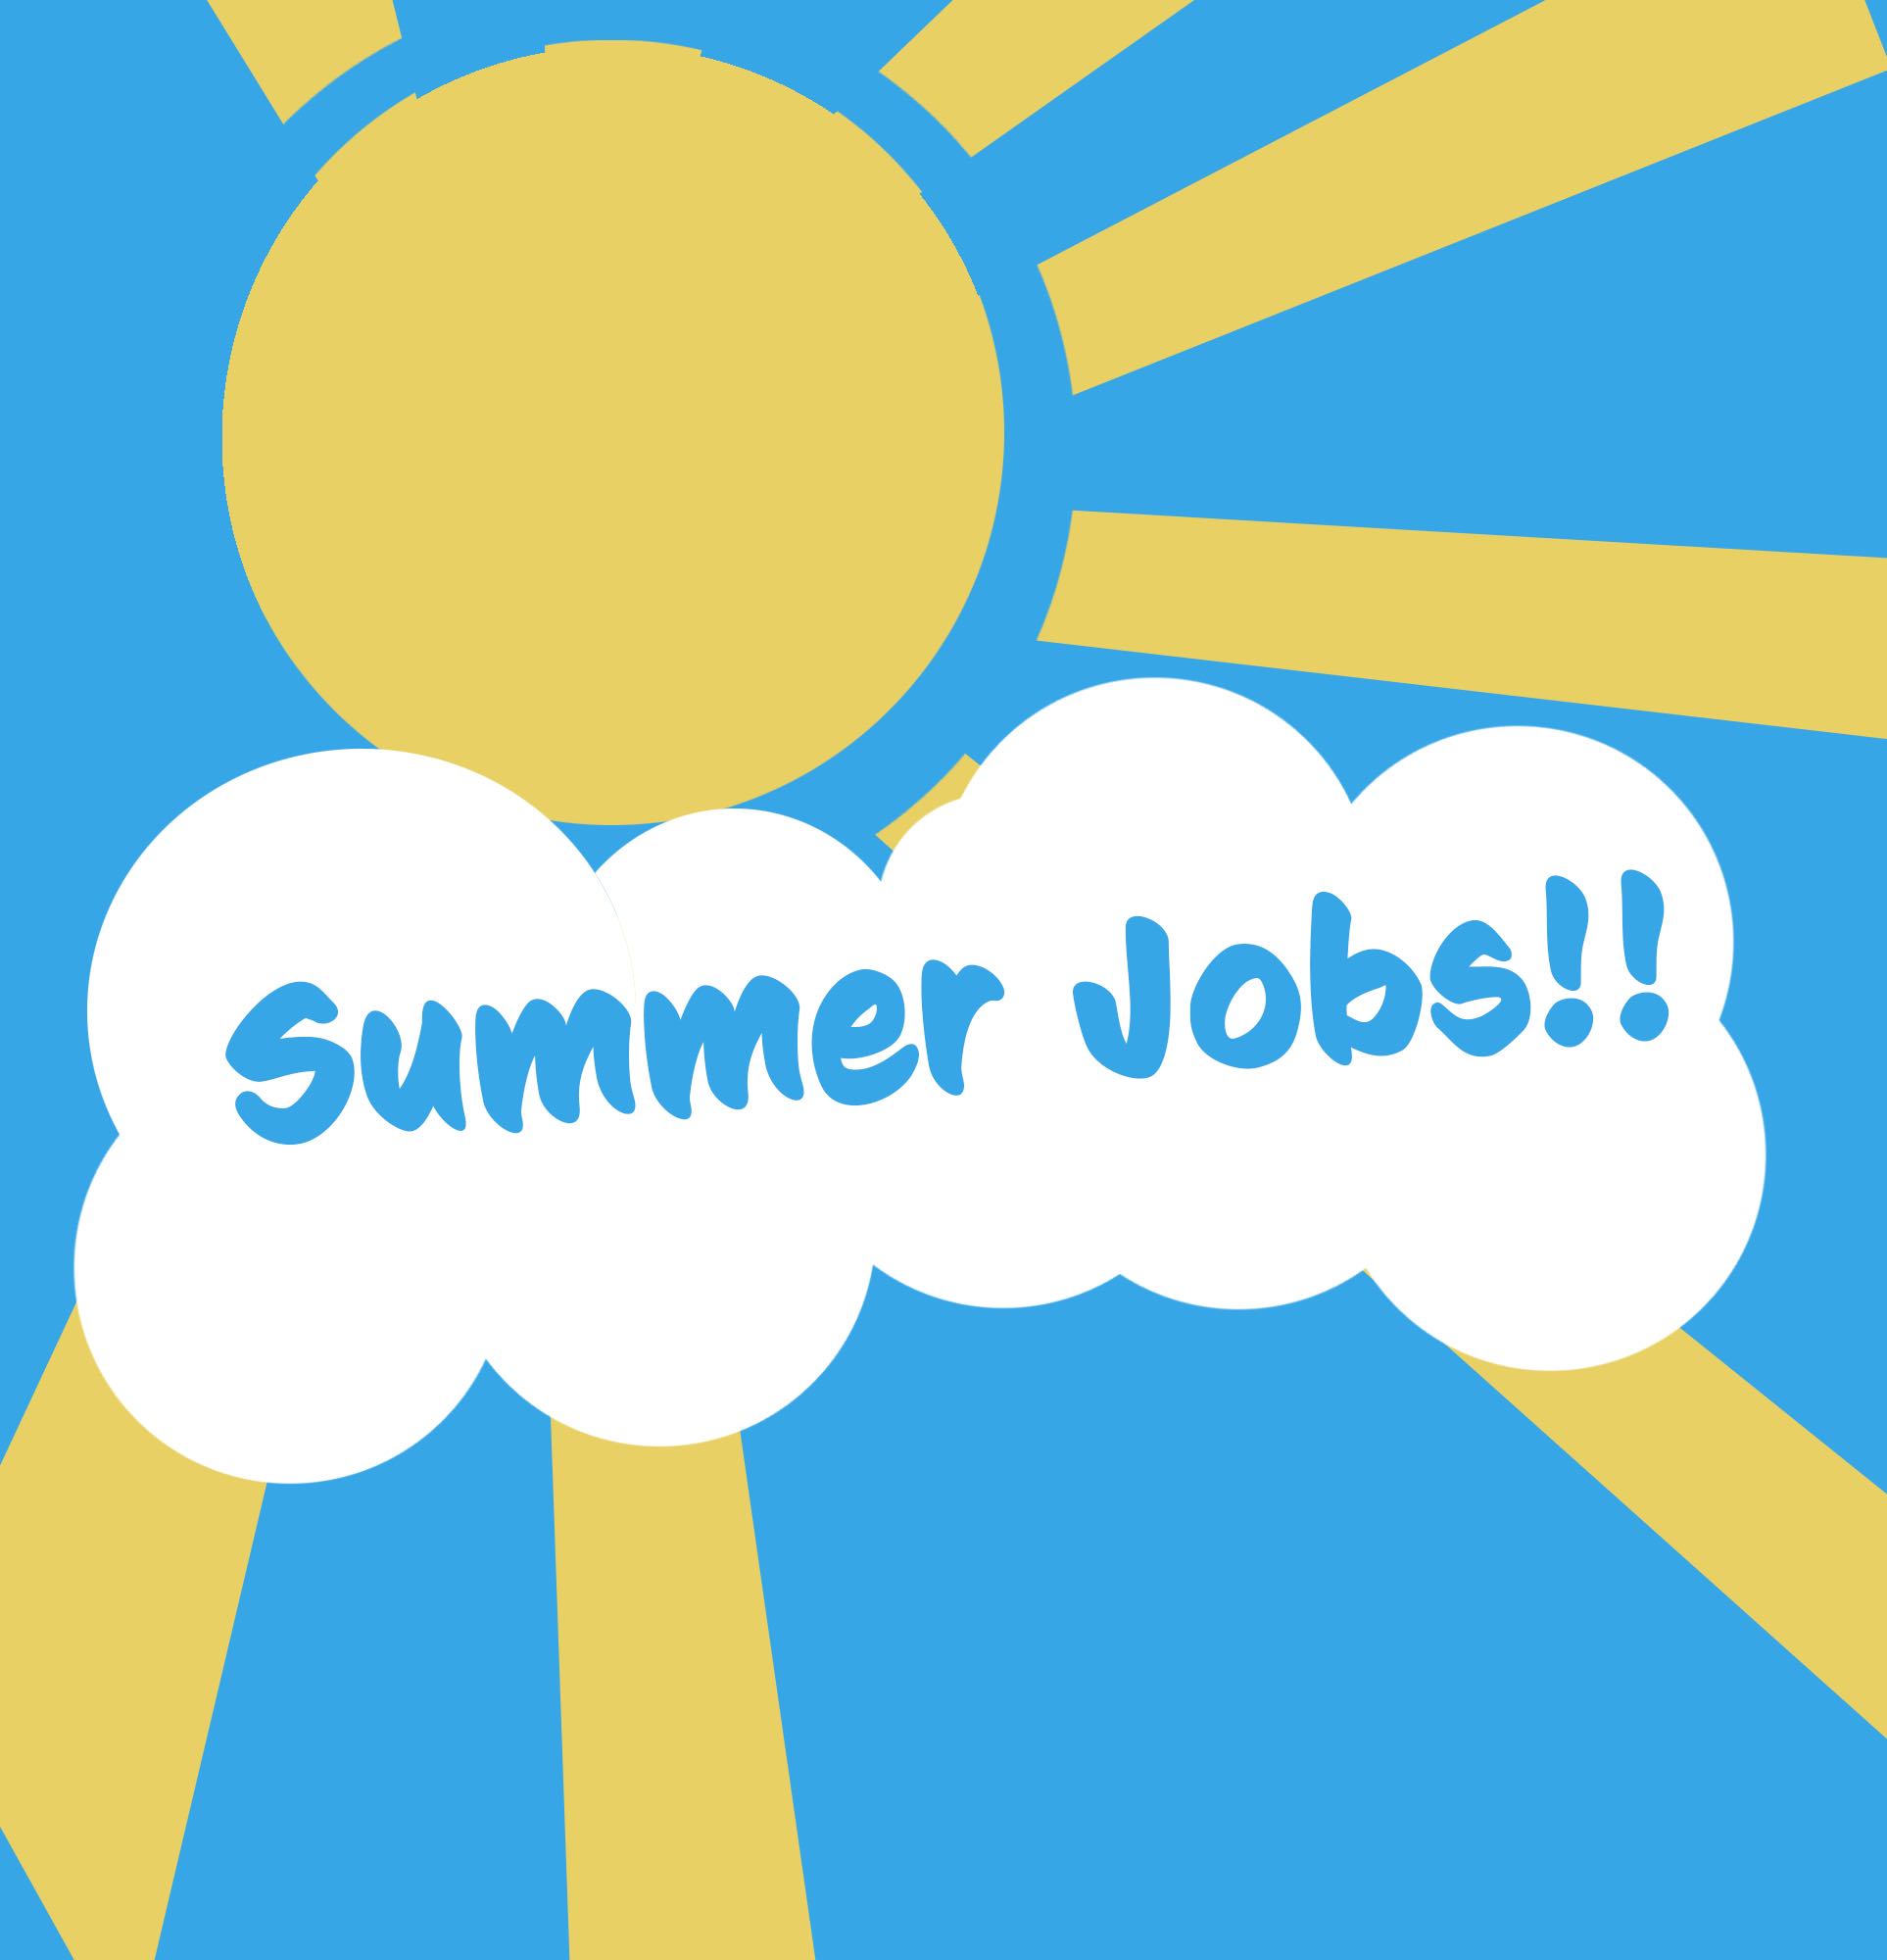 'Summer Jobs' on white cloud over yellow sun on blue background